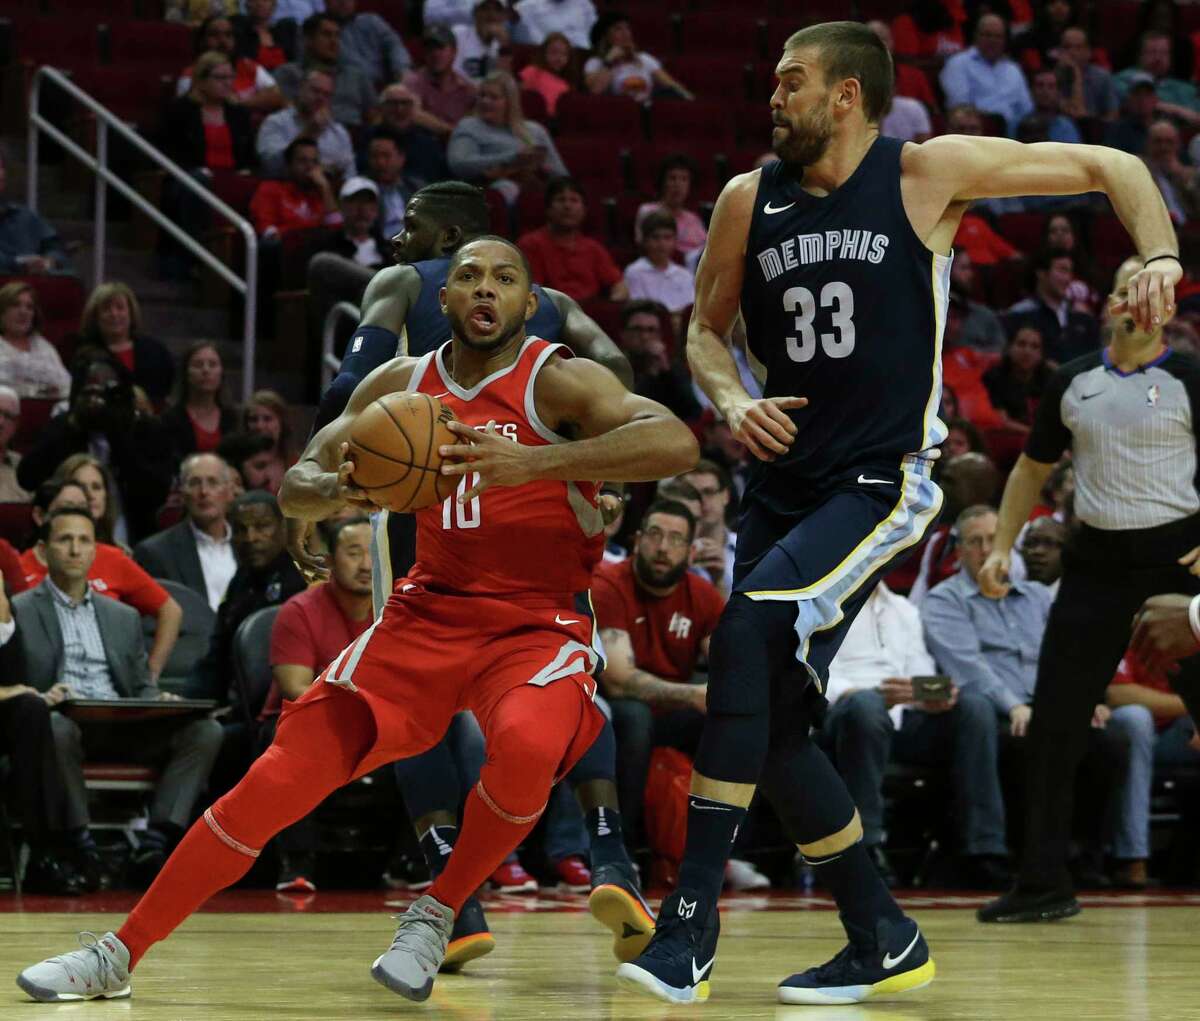 Houston Rockets guard Eric Gordon (10) moves toward the basket while Memphis Grizzlies center Marc Gasol (33) is trying to stop him during the second quarter of the NBA game at Toyota Center Monday, Oct. 23, 2017, in Houston.